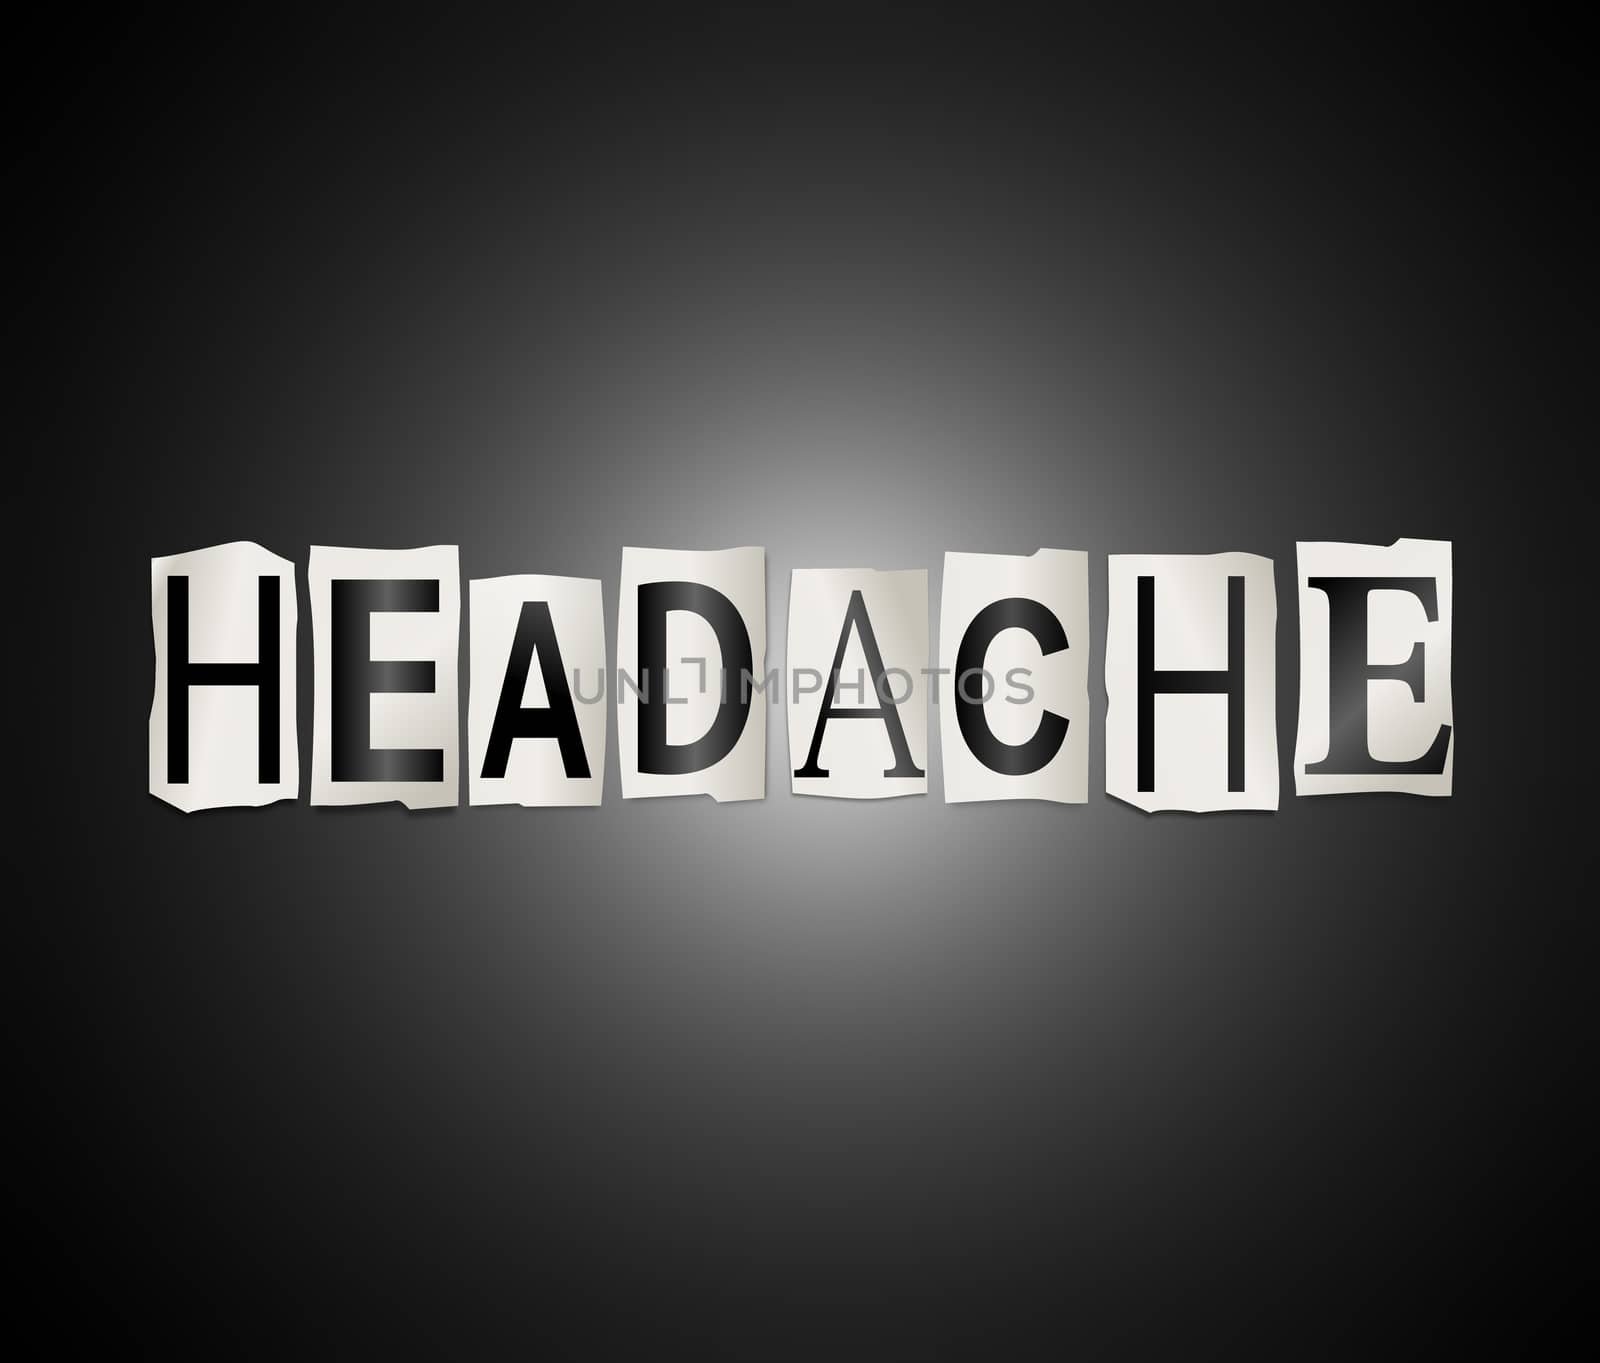 Illustration depicting a set of cut out printed letters arranged to form the word headache.